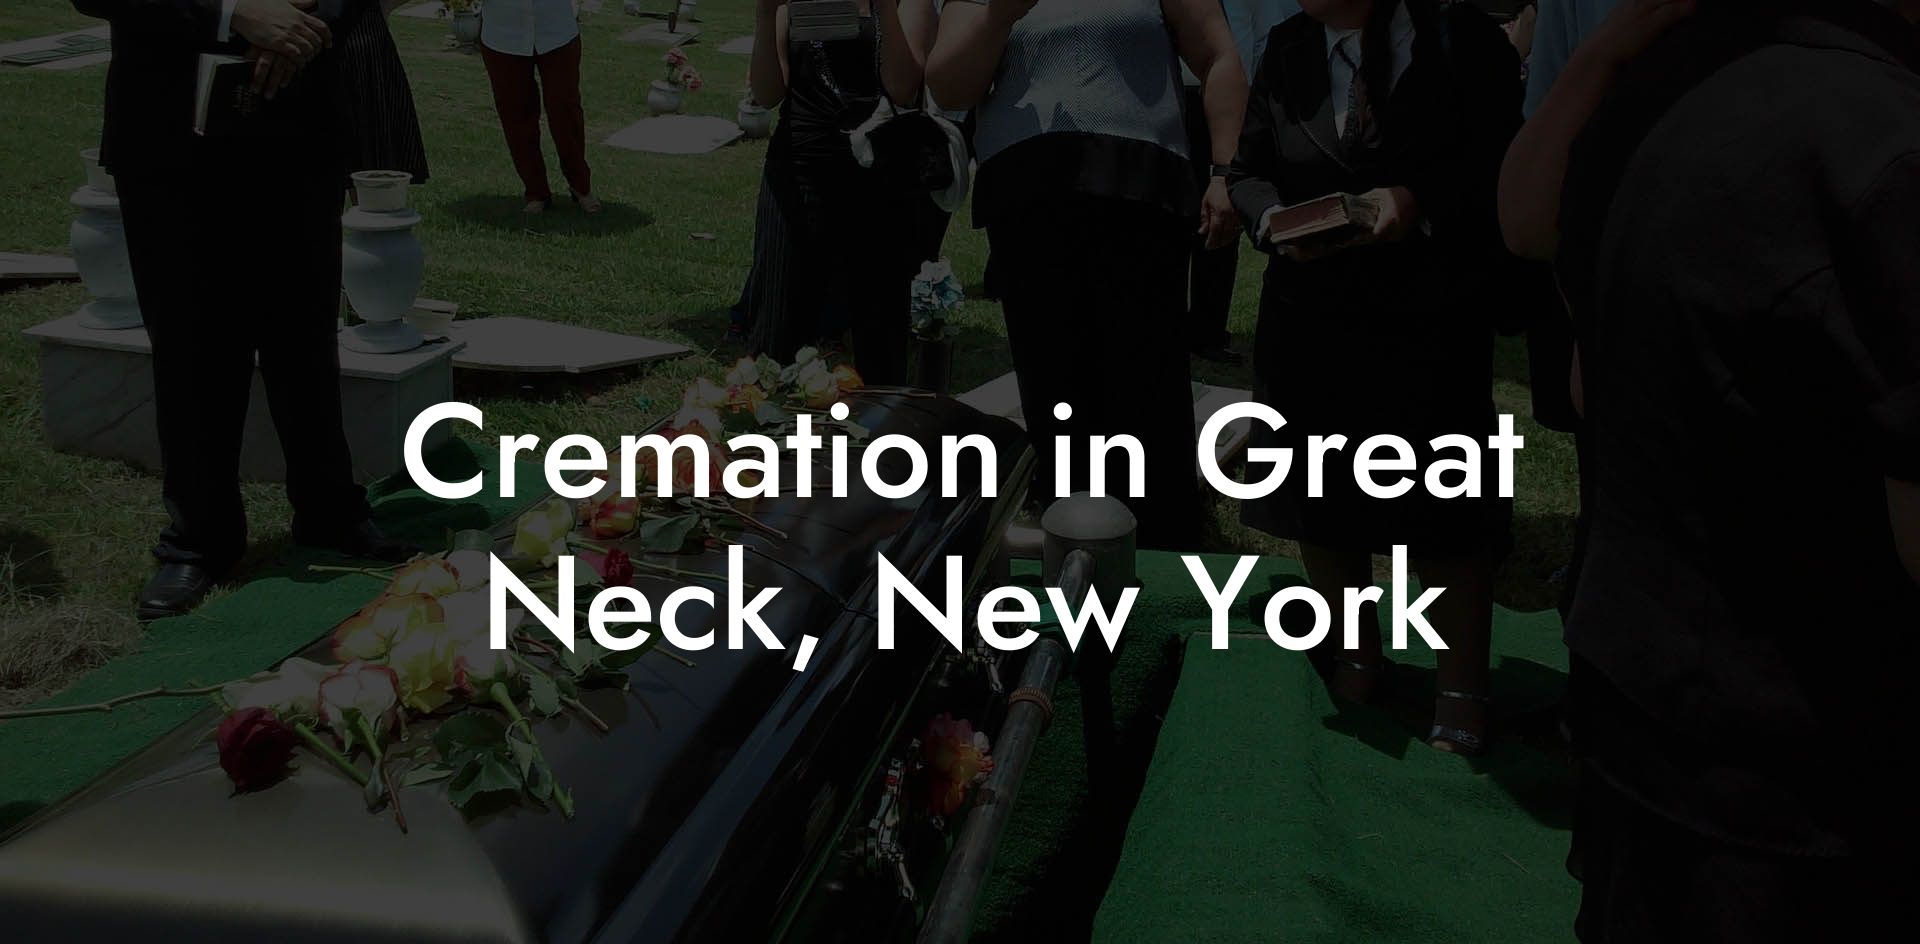 Cremation in Great Neck, New York